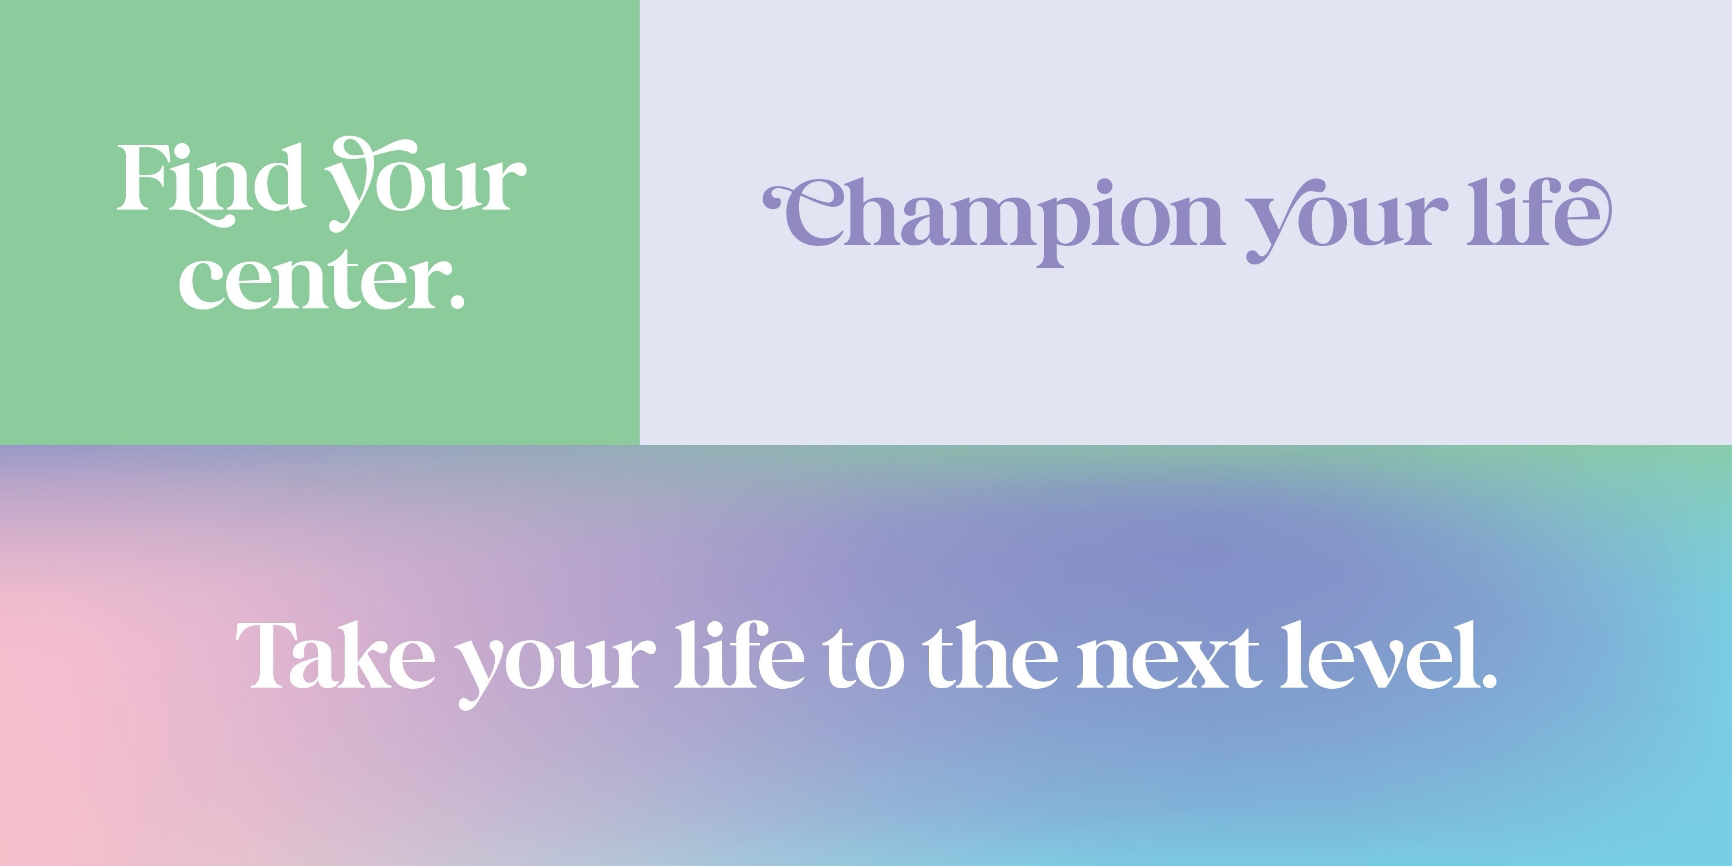 Lifewell font and gradient tagline combinations